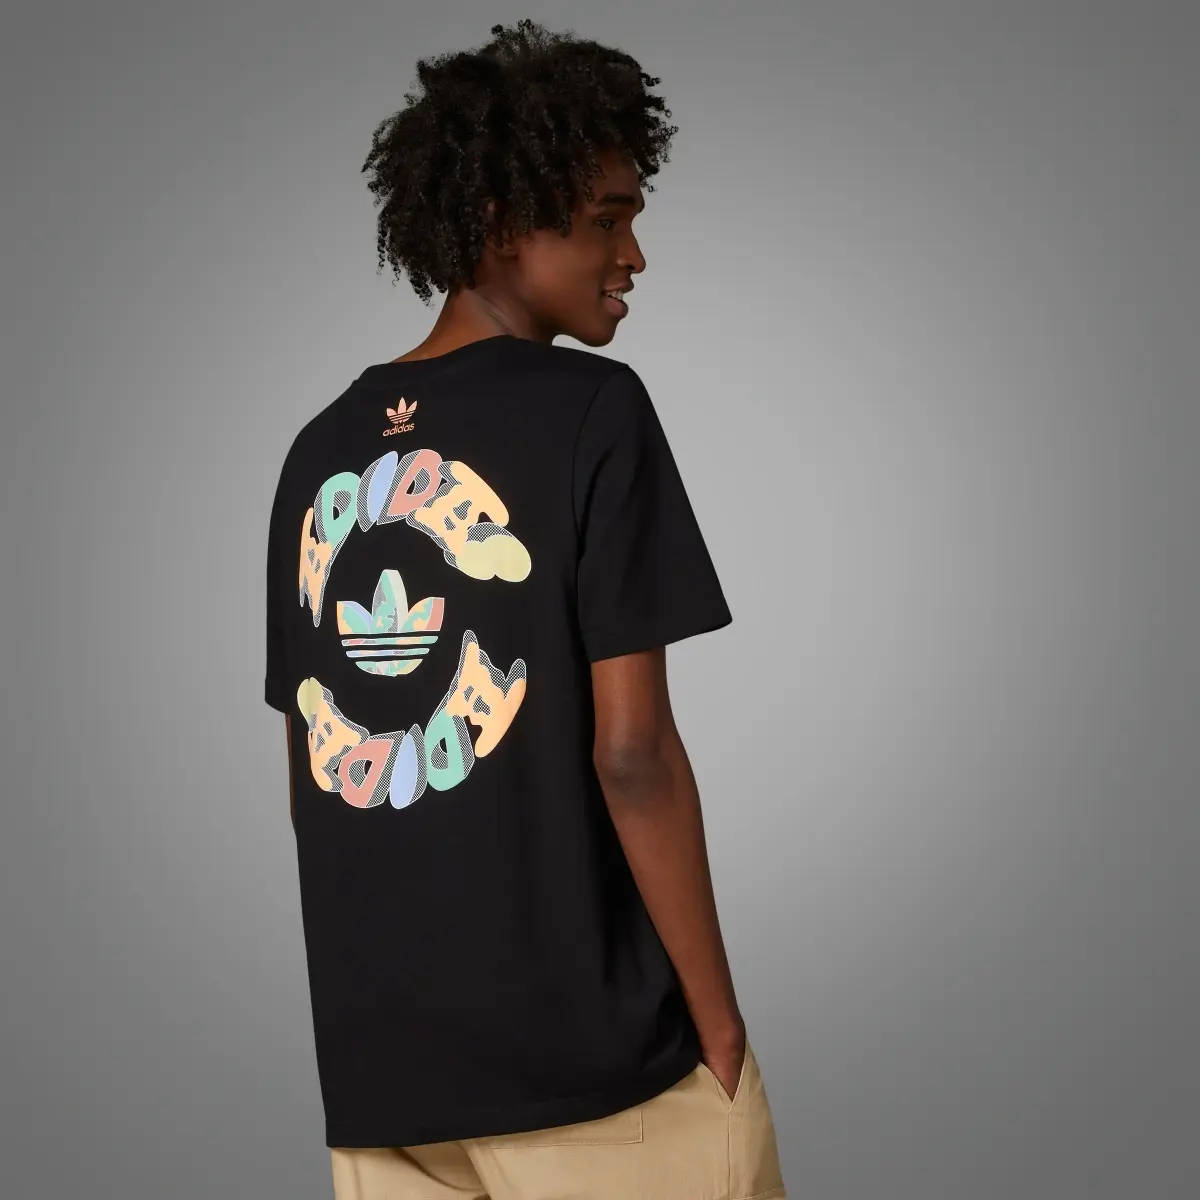 Adidas Enjoy Summer Front/Back Graphic Tee. 2